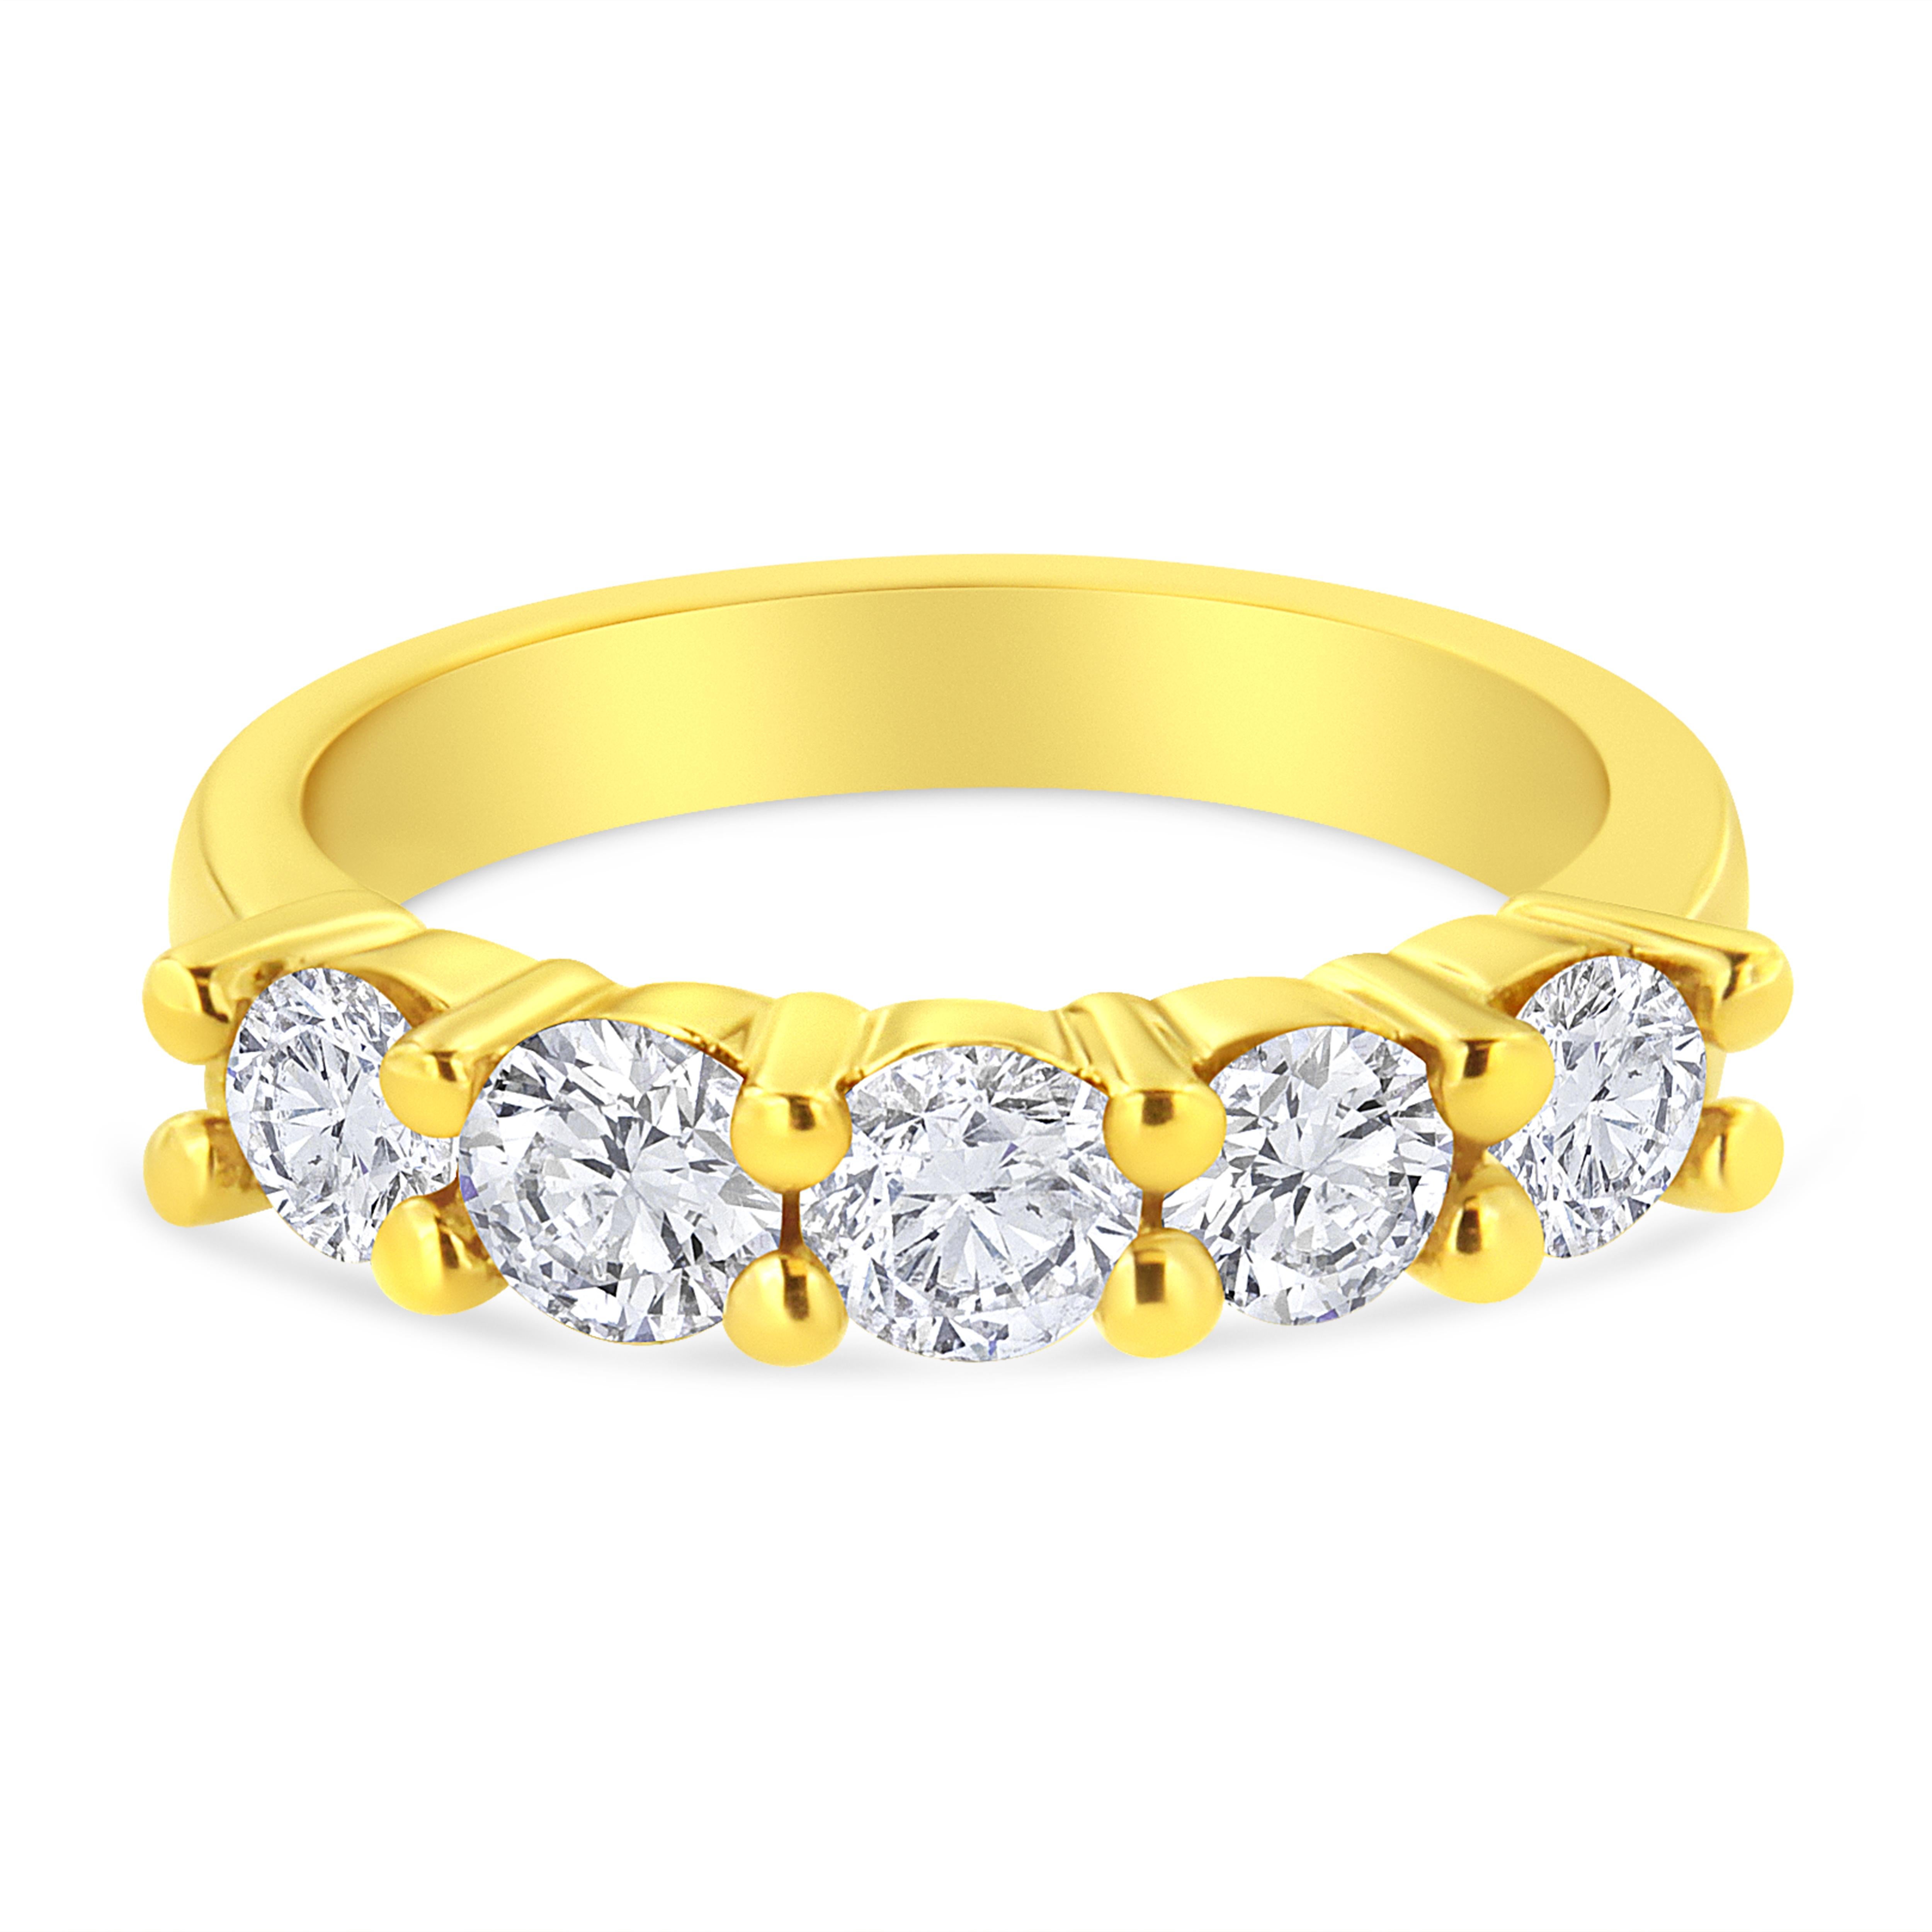 Classic and elegant, this 14k yellow gold plated sterling silver ring is a must have piece. 5 dazzling round cut diamonds in a prong setting line the top of a warm yellow gold band. 1 1/2ct TDW of diamonds are showcased in this ring.

Product